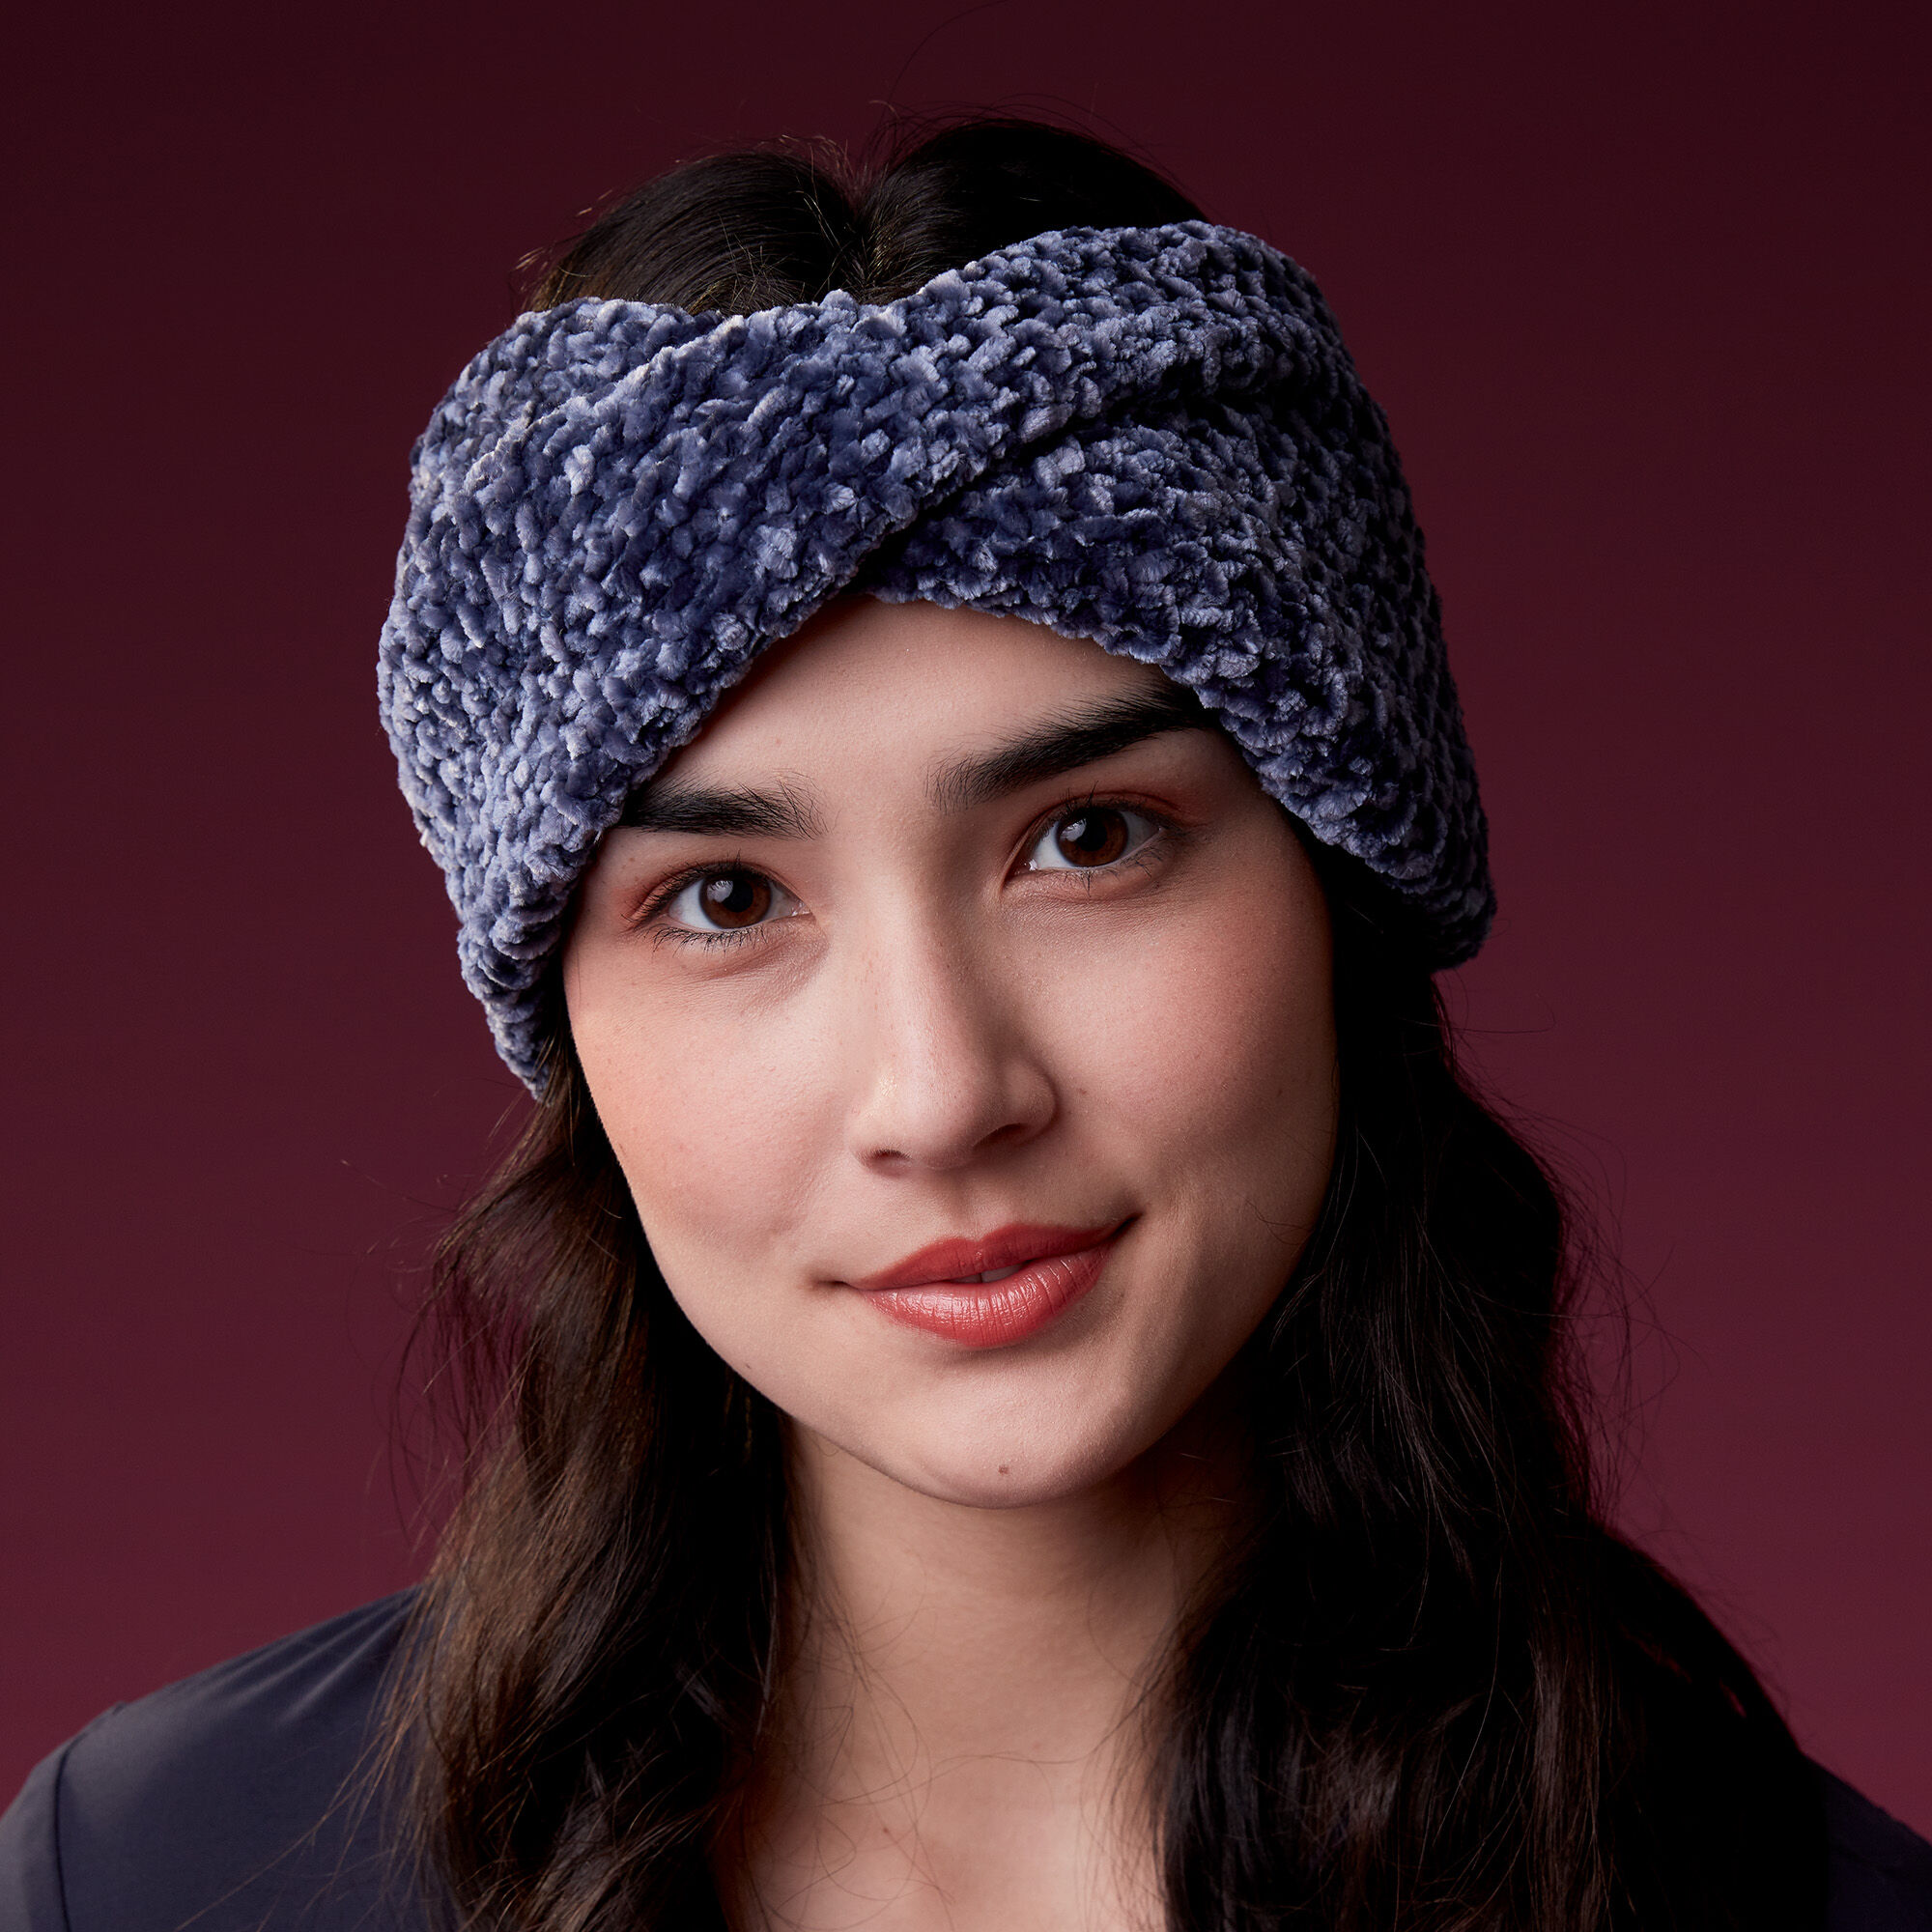 Knitting Pattern for a Cozy and Stylish Headband - Mikes Natura